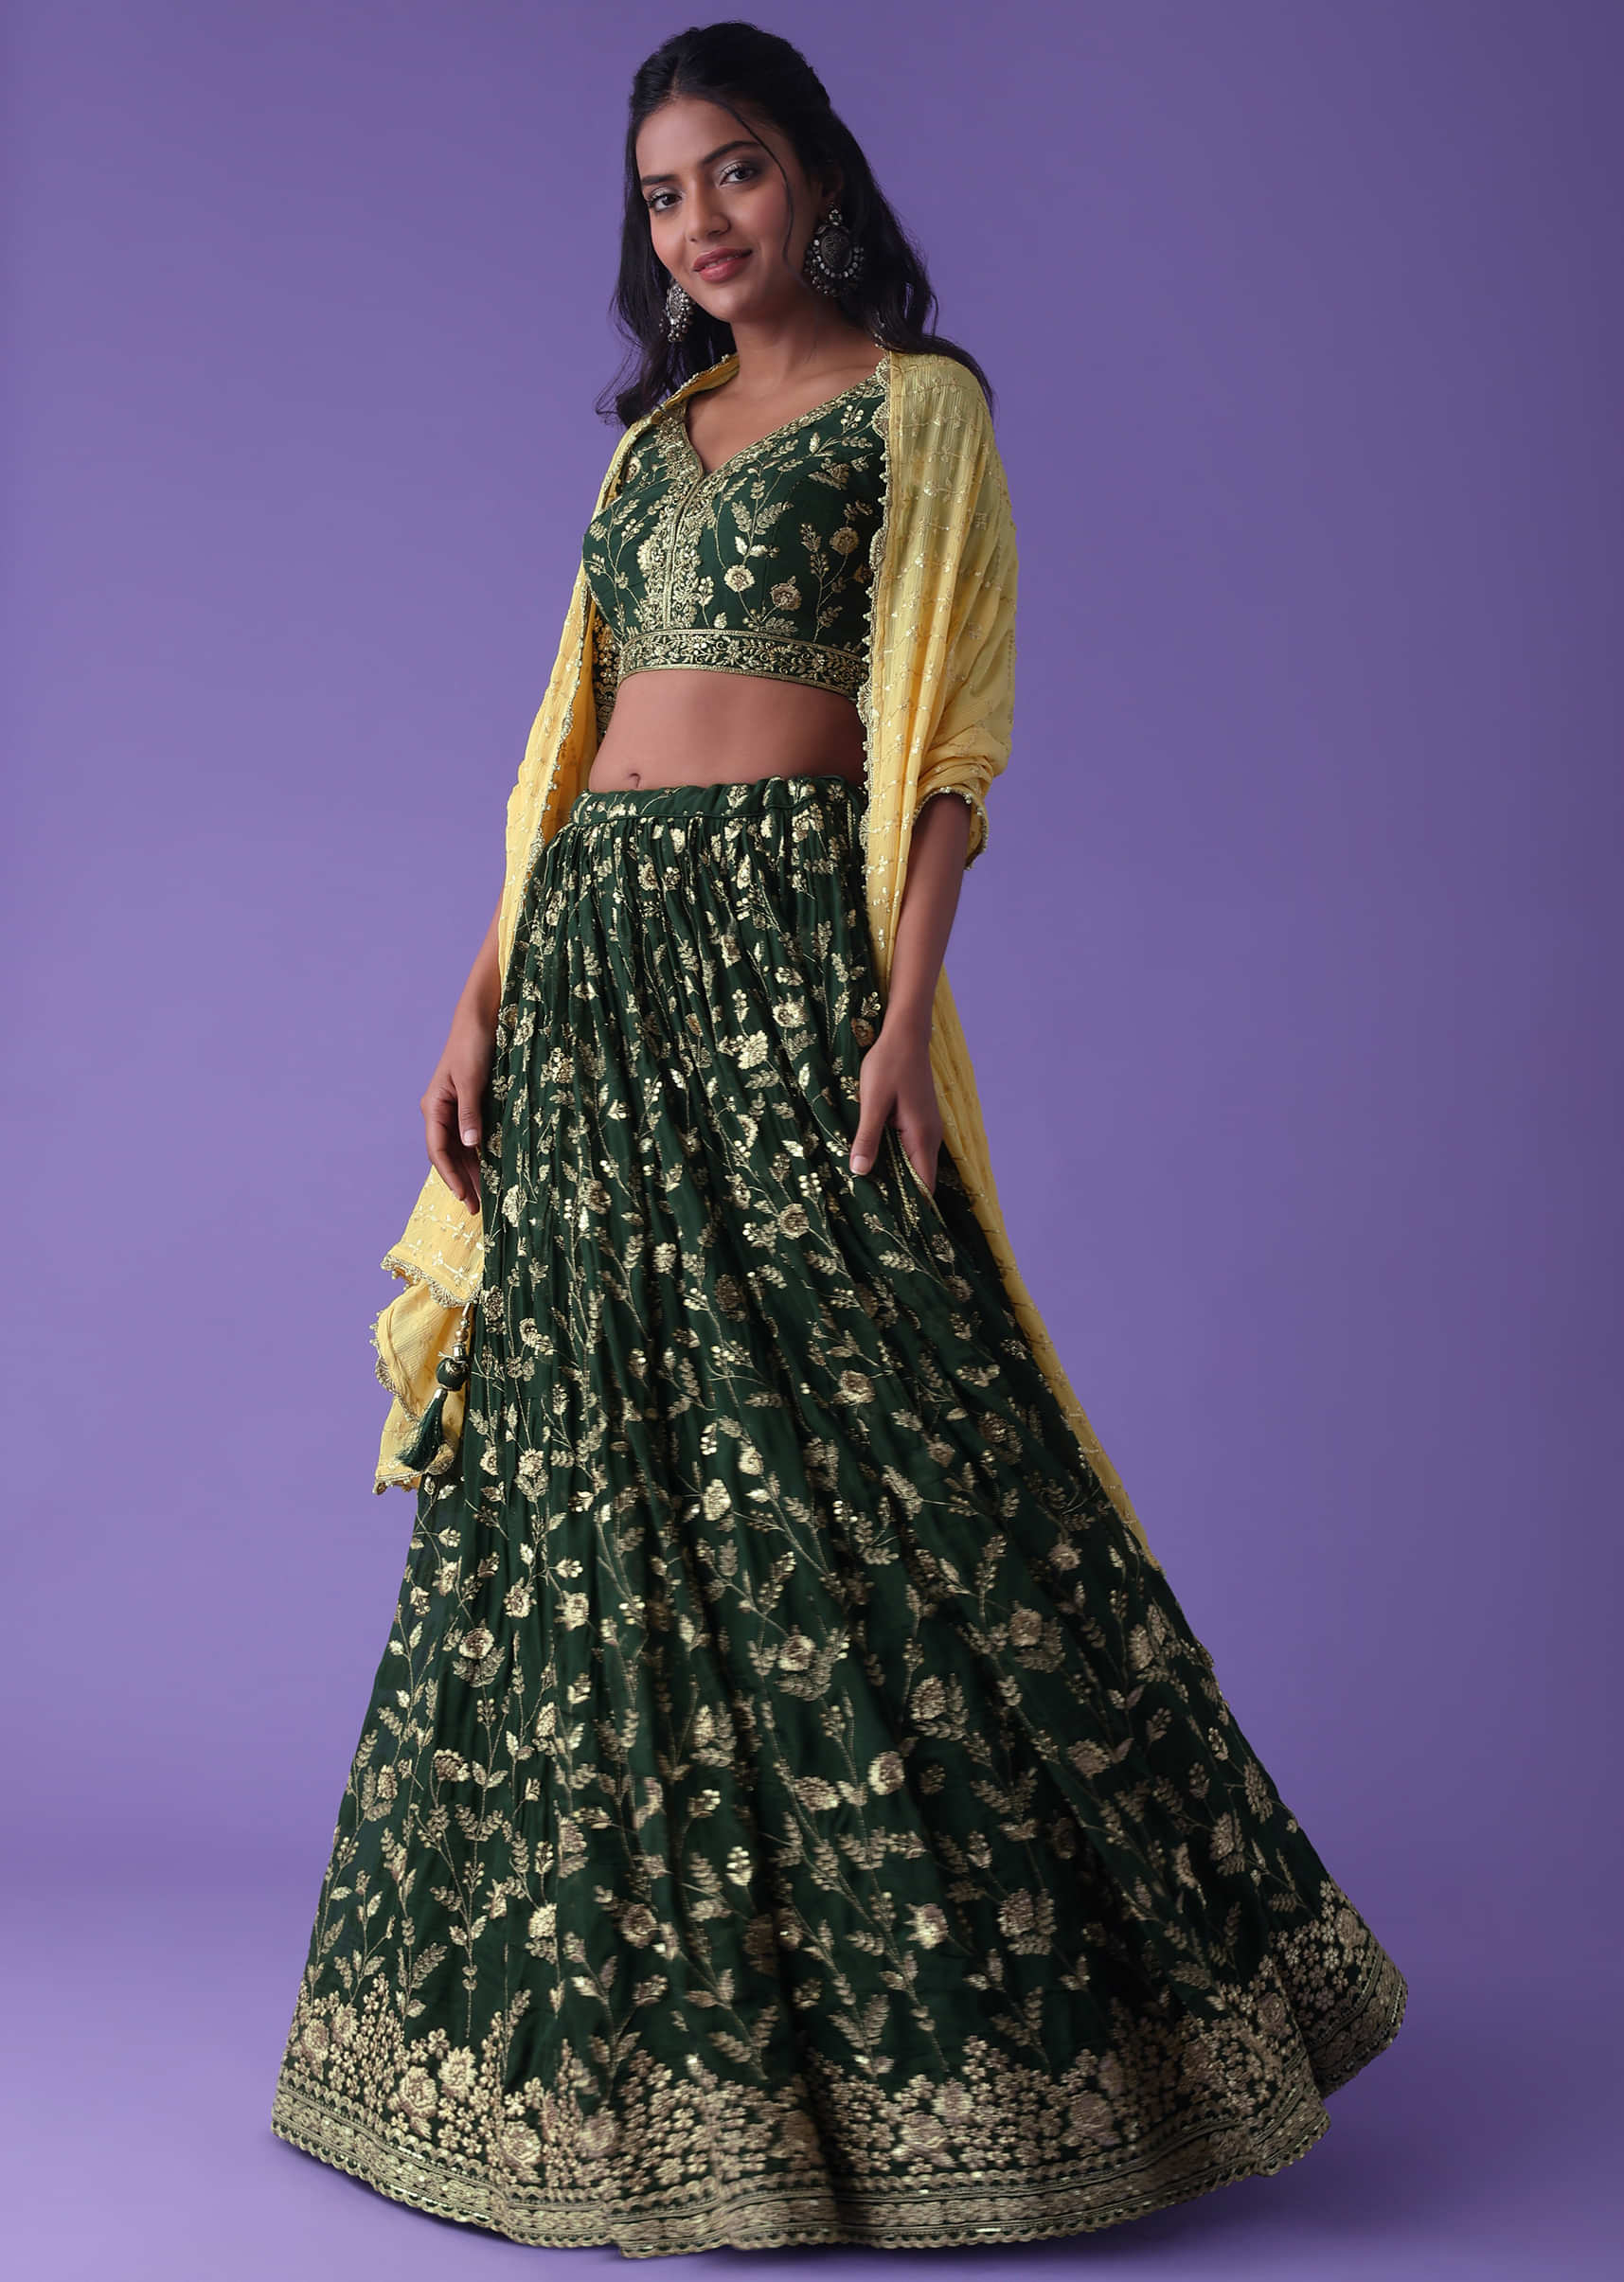 June Bug Green Georgette Lehenga With Zari And Sequins Embroidery